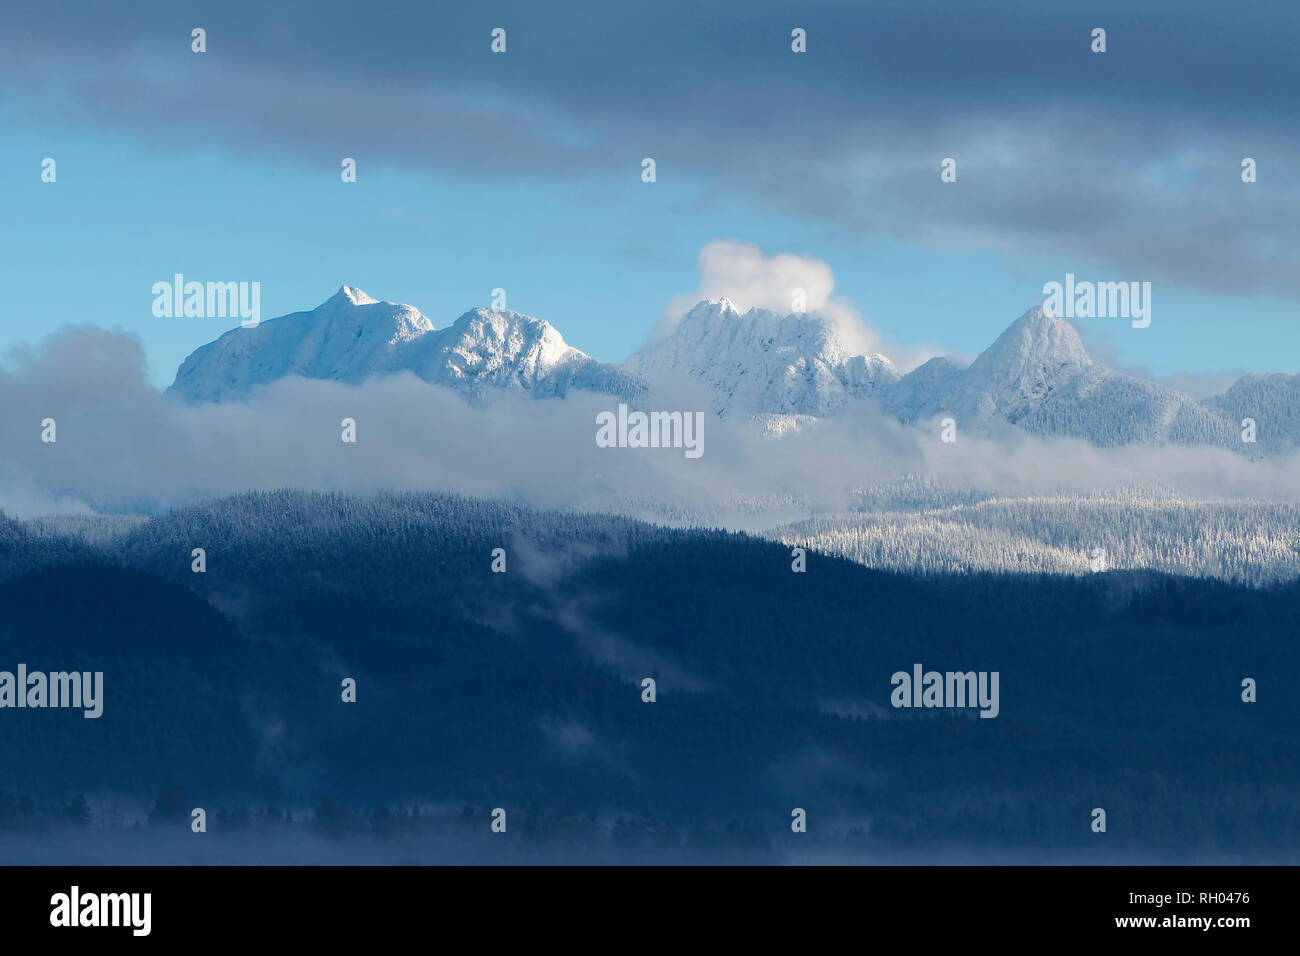 Golden Ears Mountain Range with snow-capped peaks and wispy clouds in the foreground. Stock Photo